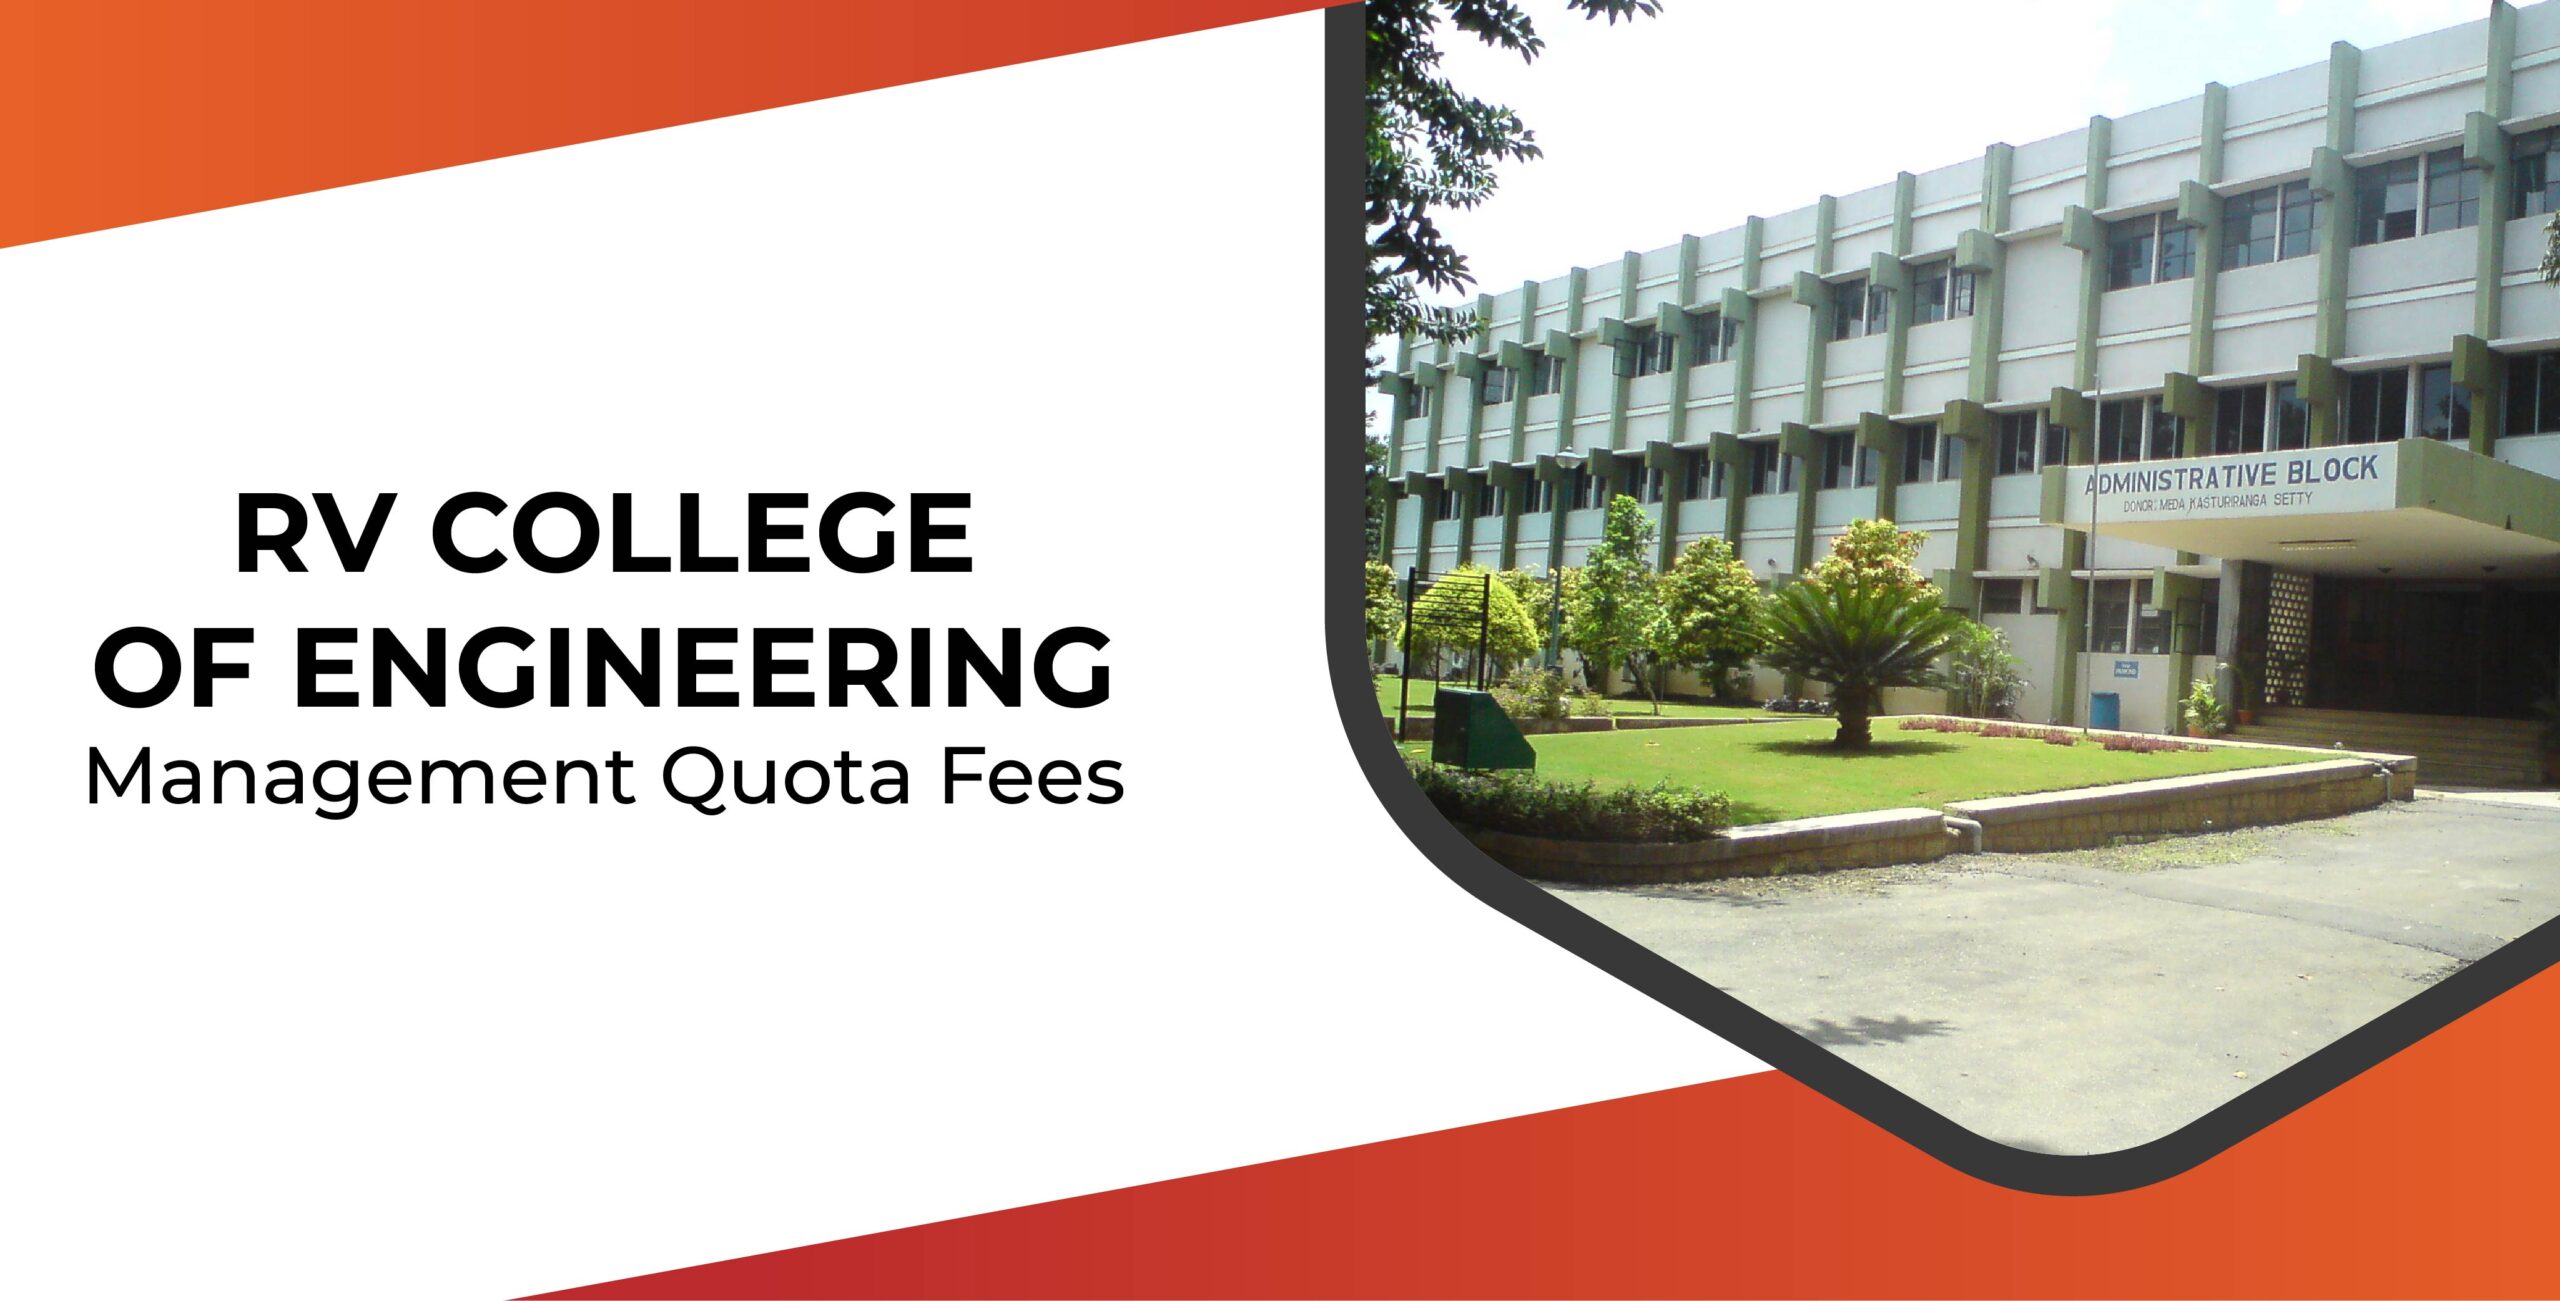 R V College of Engineering Management Quota Fees